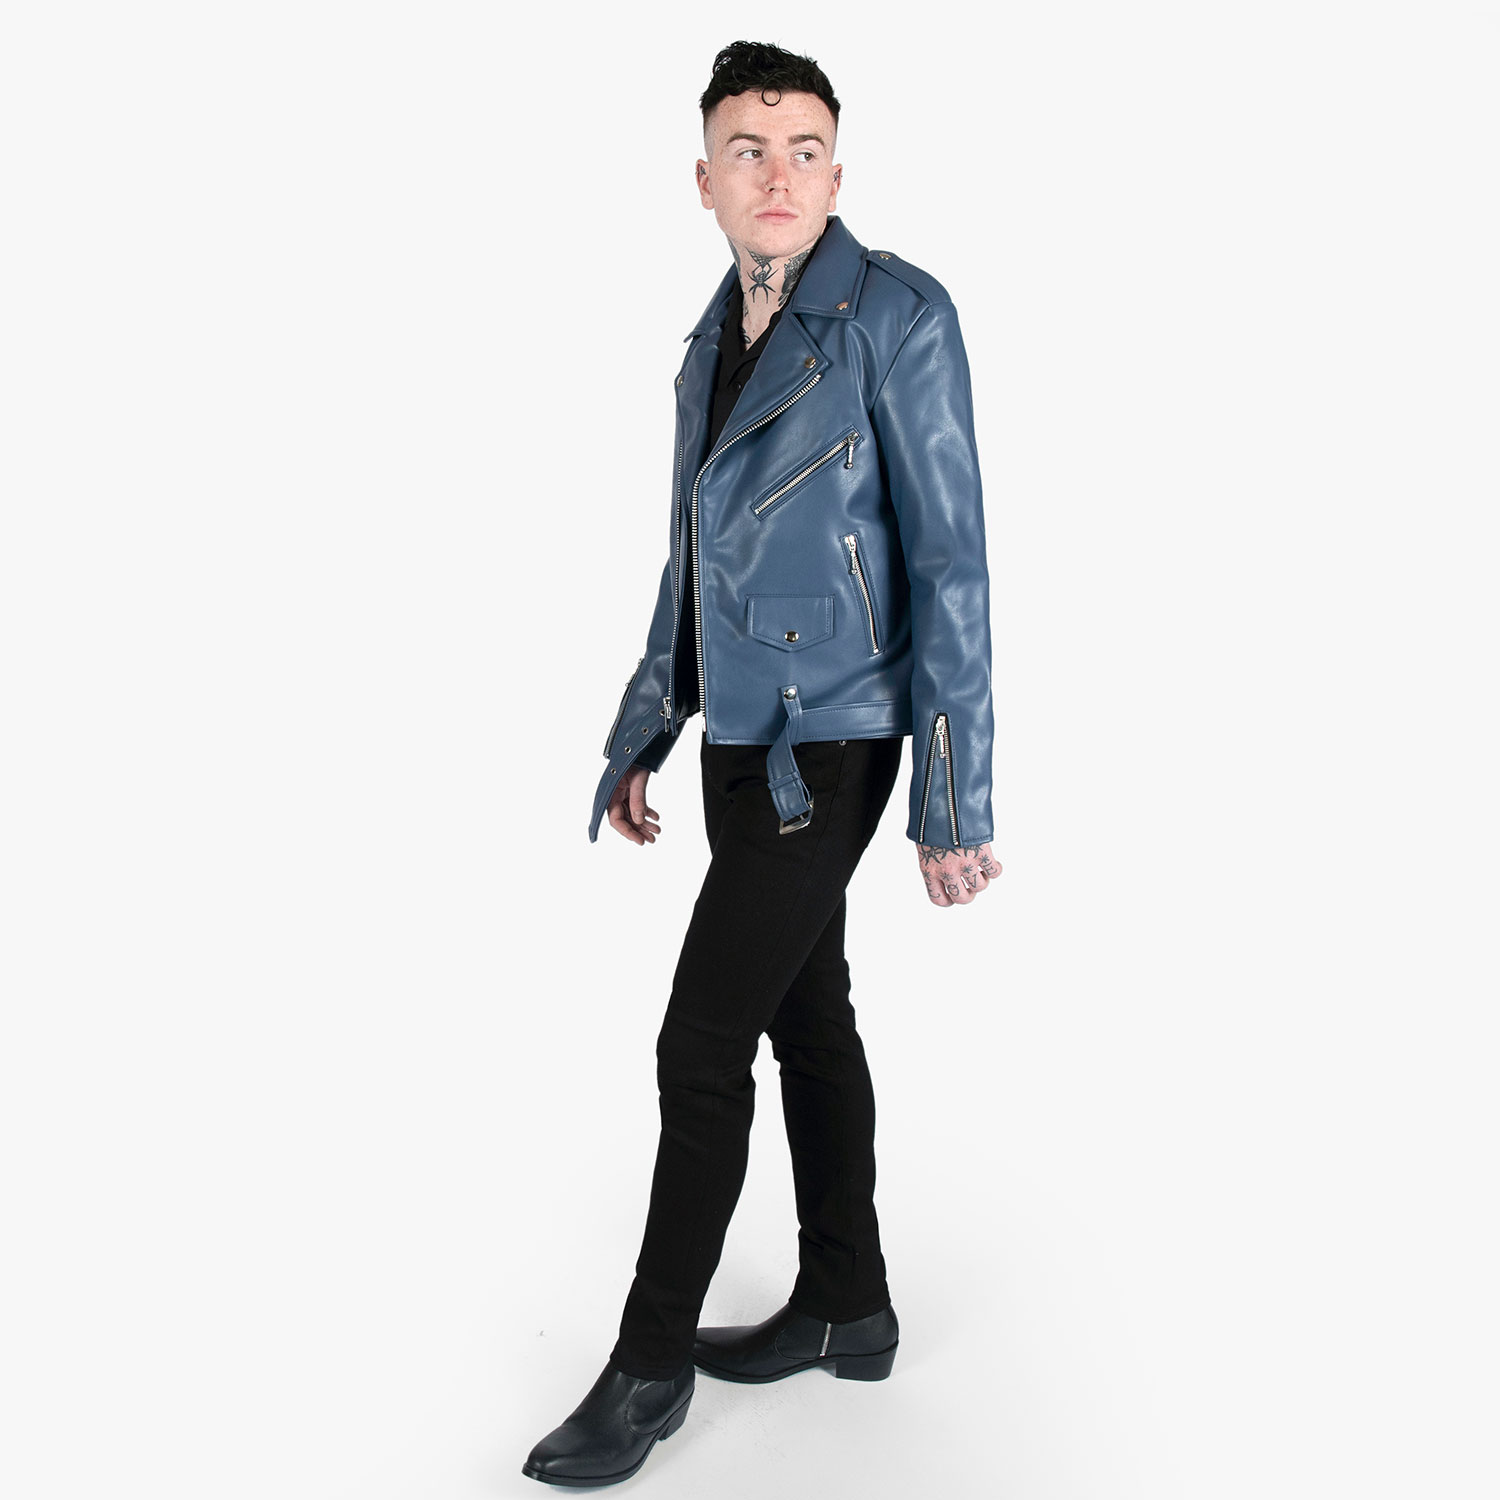 Vegan Commando Long - for Tall Men - Black and Nickel Faux Leather Jacket - Men's by Straight to Hell